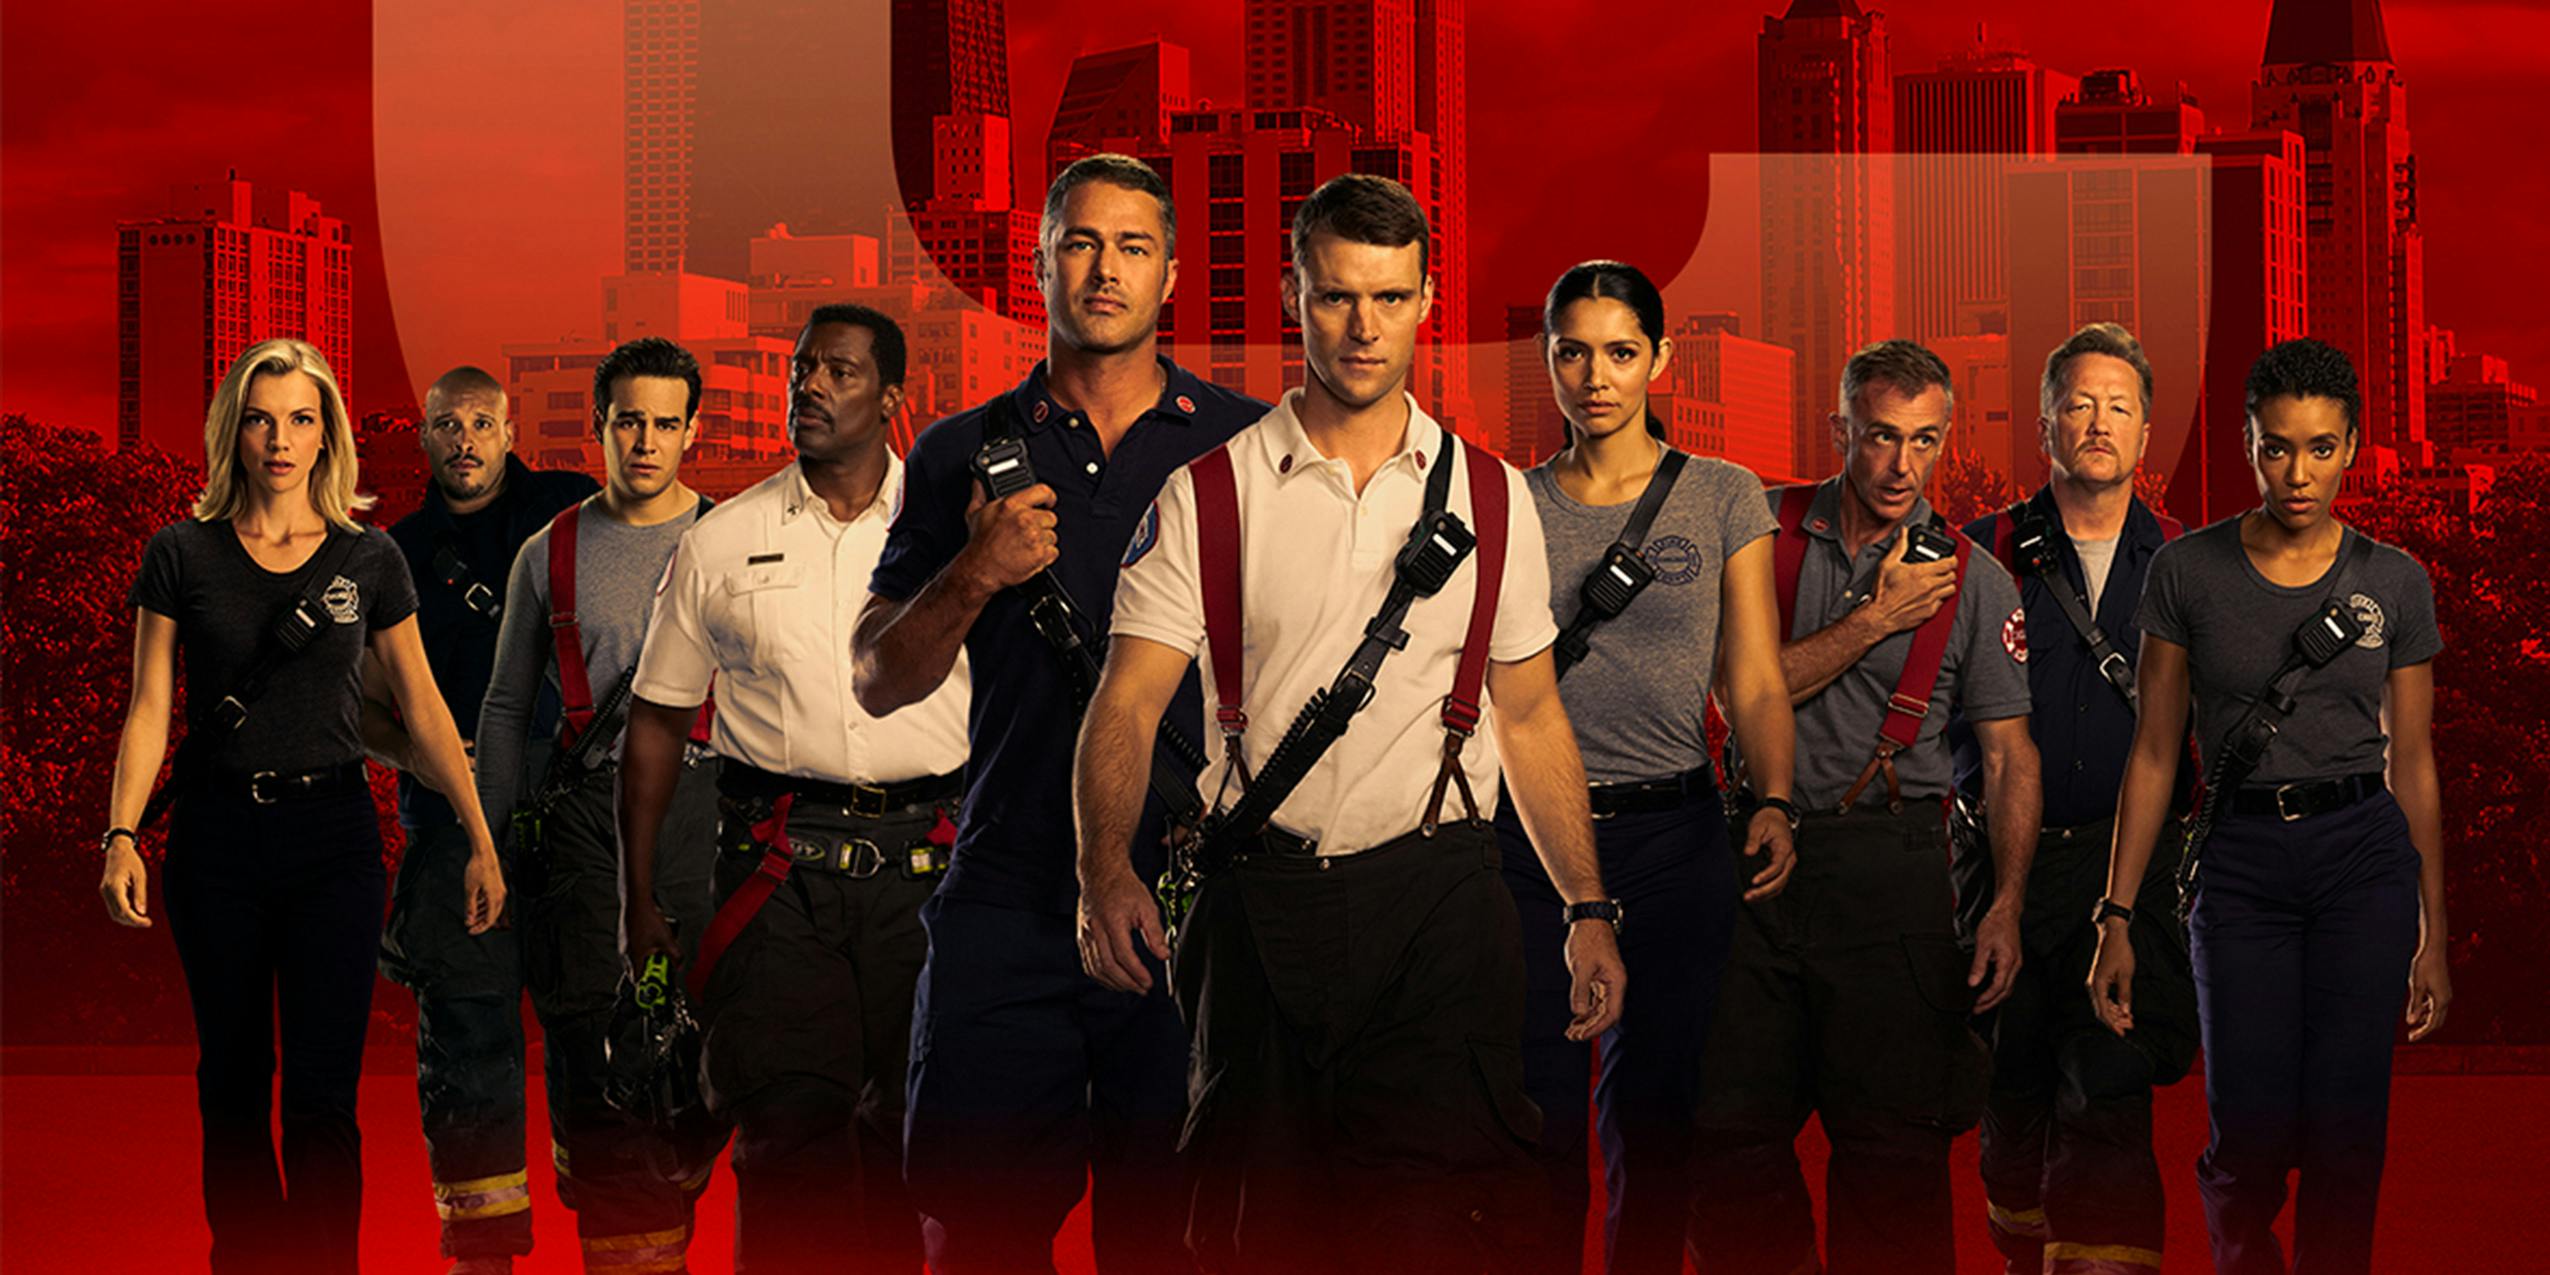 Stream 'Chicago Fire': How to Watch Chicago Drama